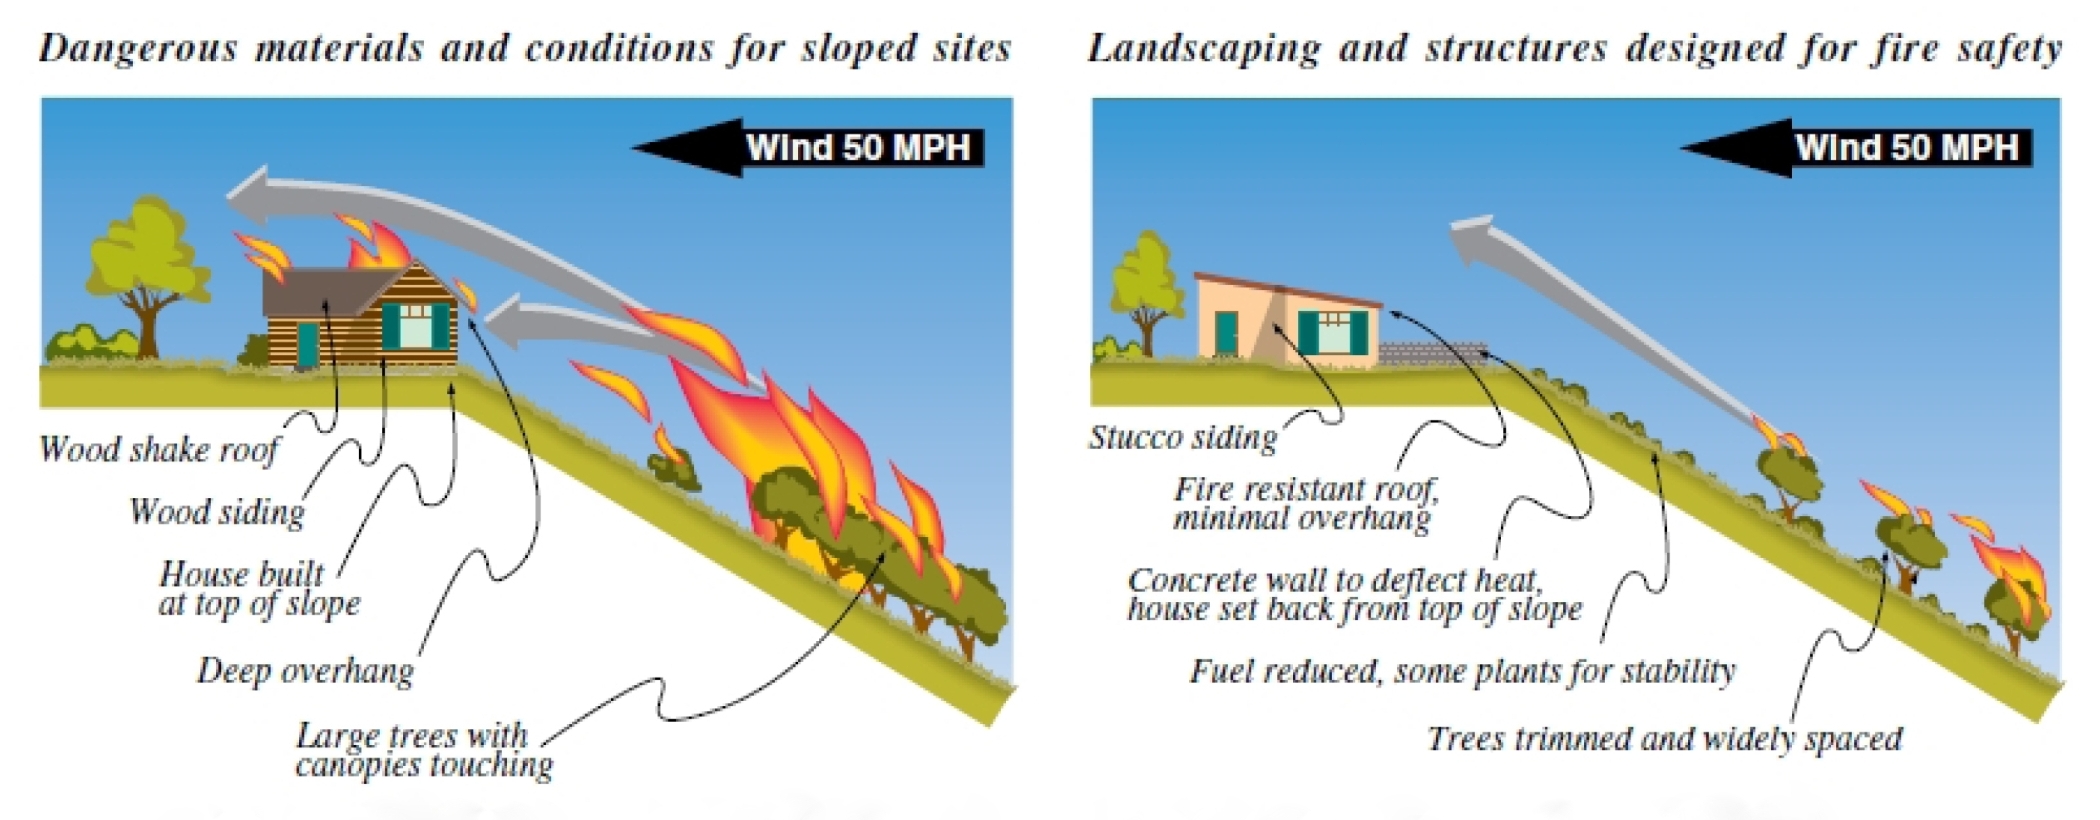 Landscaping and structures for slope wildfires